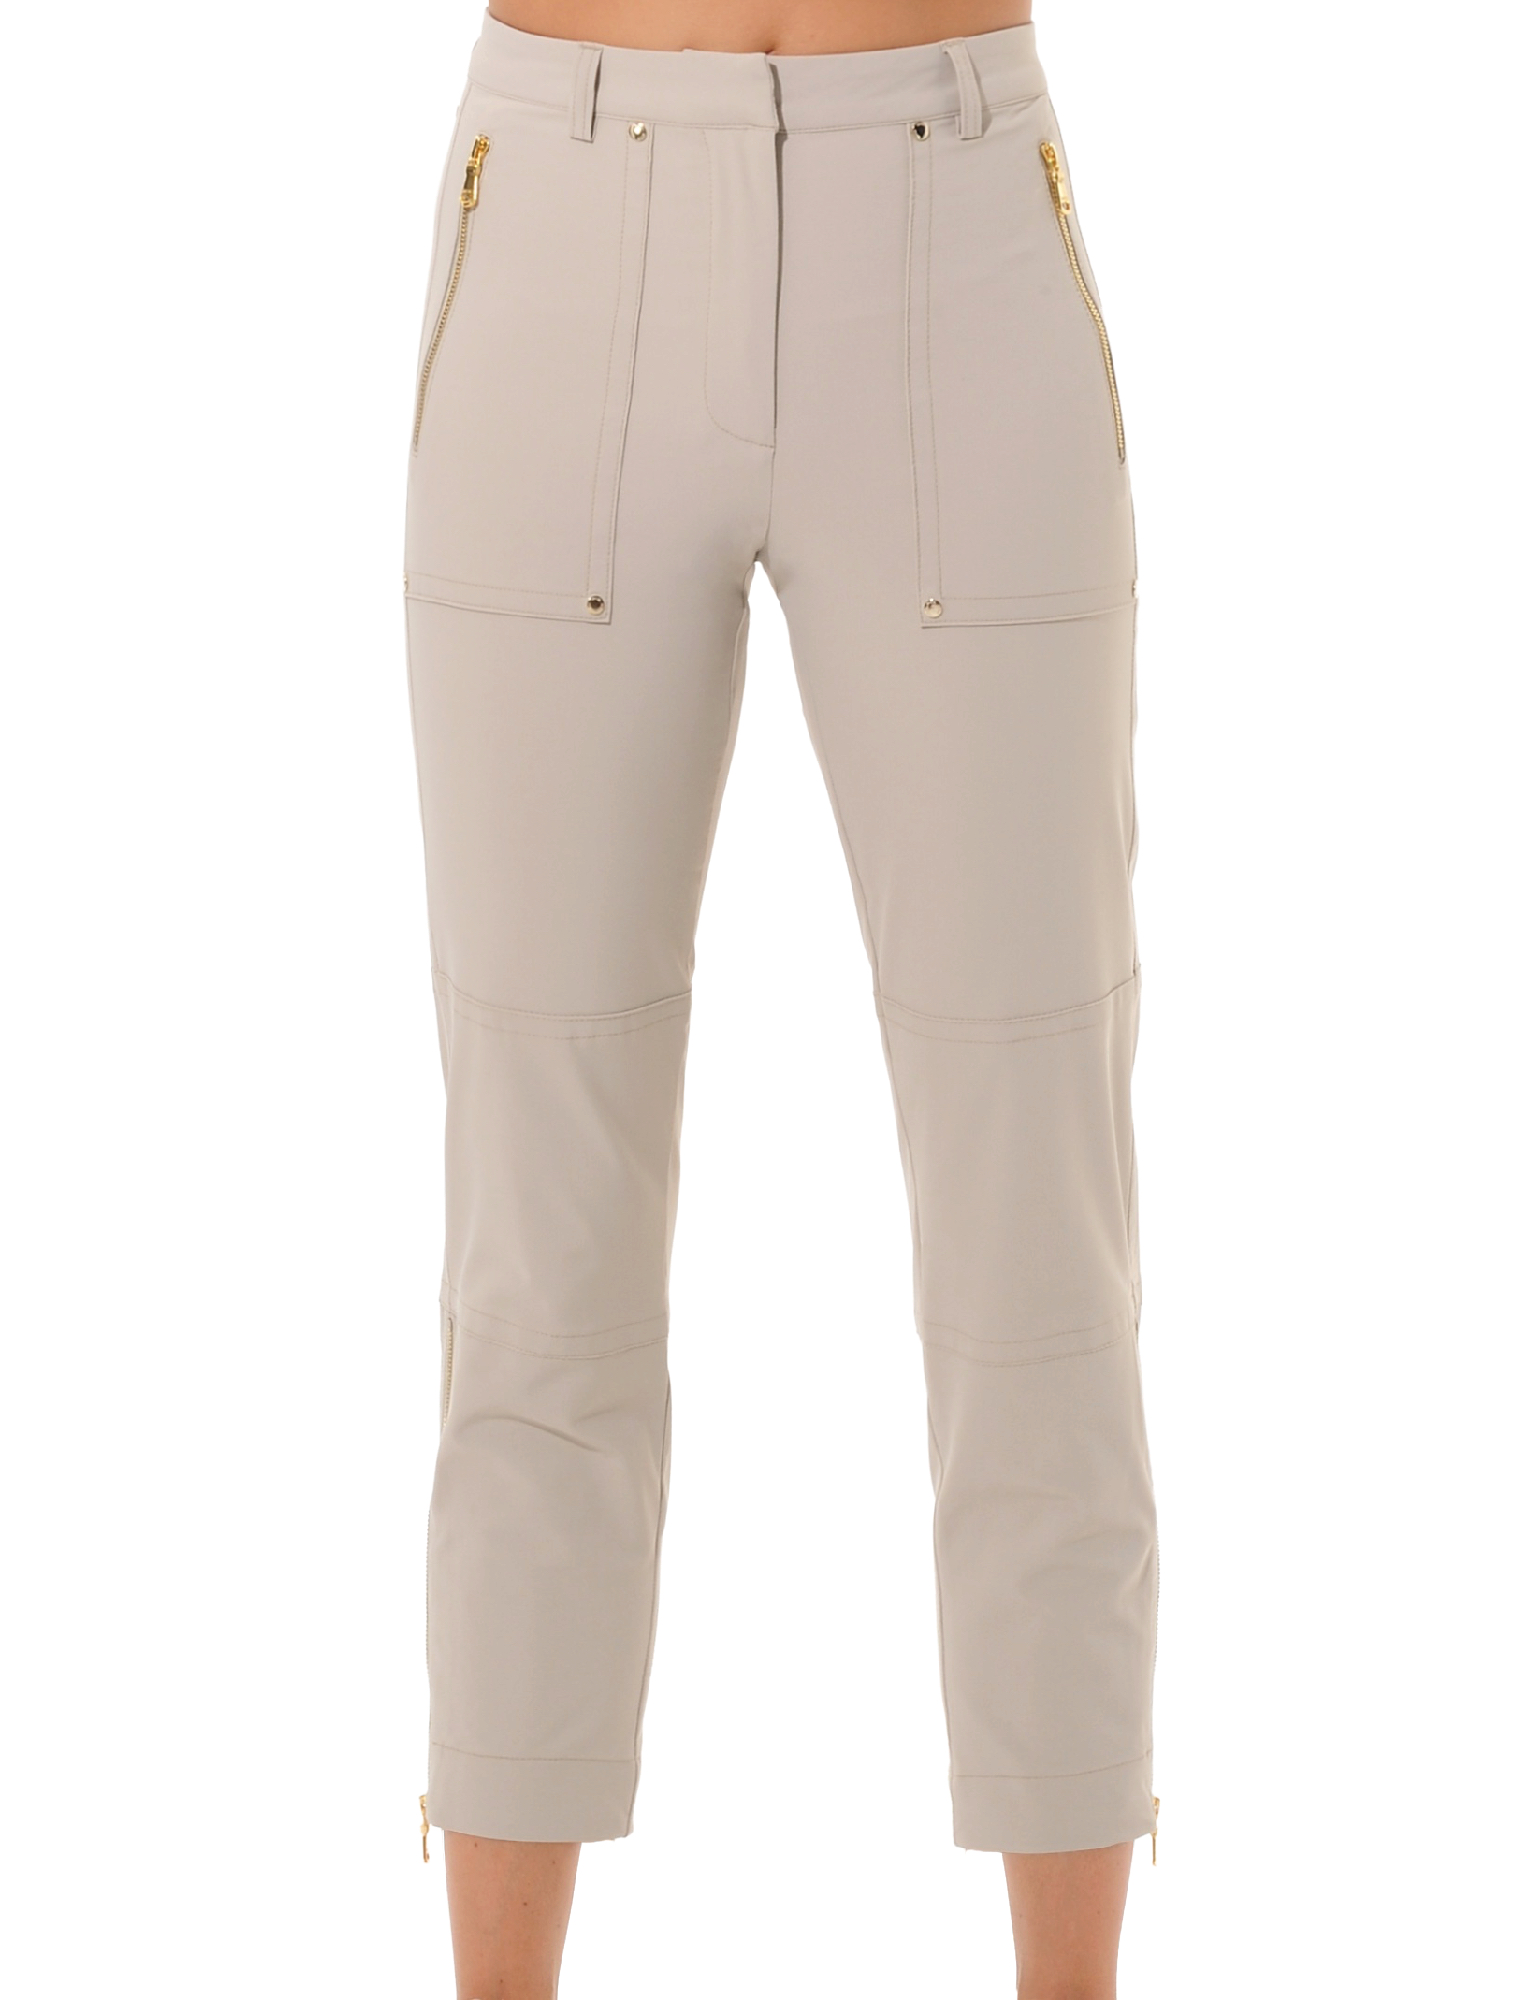 4way stretch straight fit cargo pants light taupe 